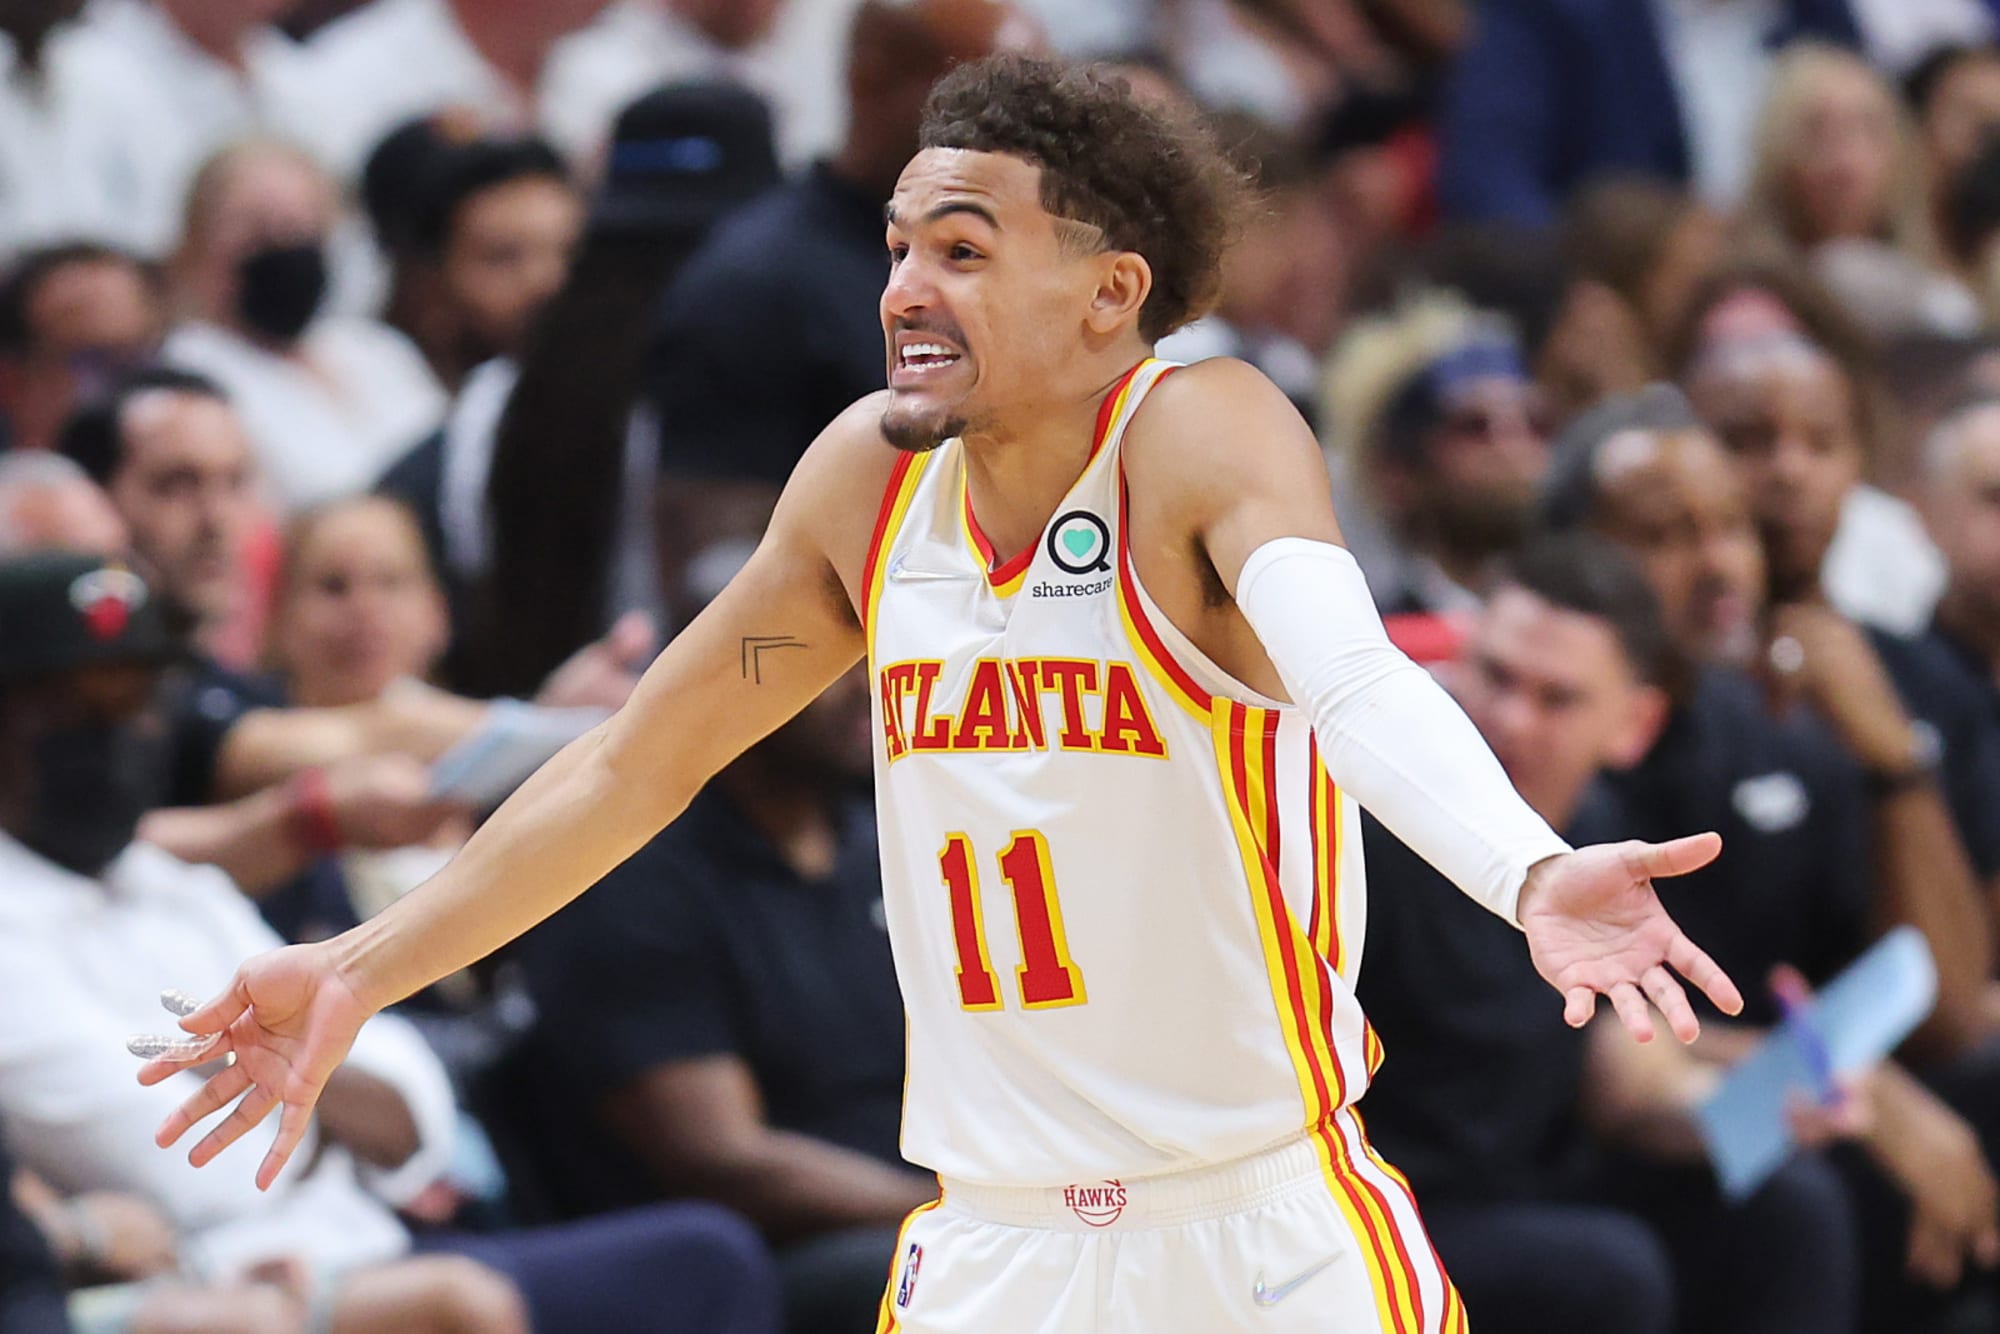 trae-young-is-still-overlooked-by-nba-execs-despite-crushing-all-expectations